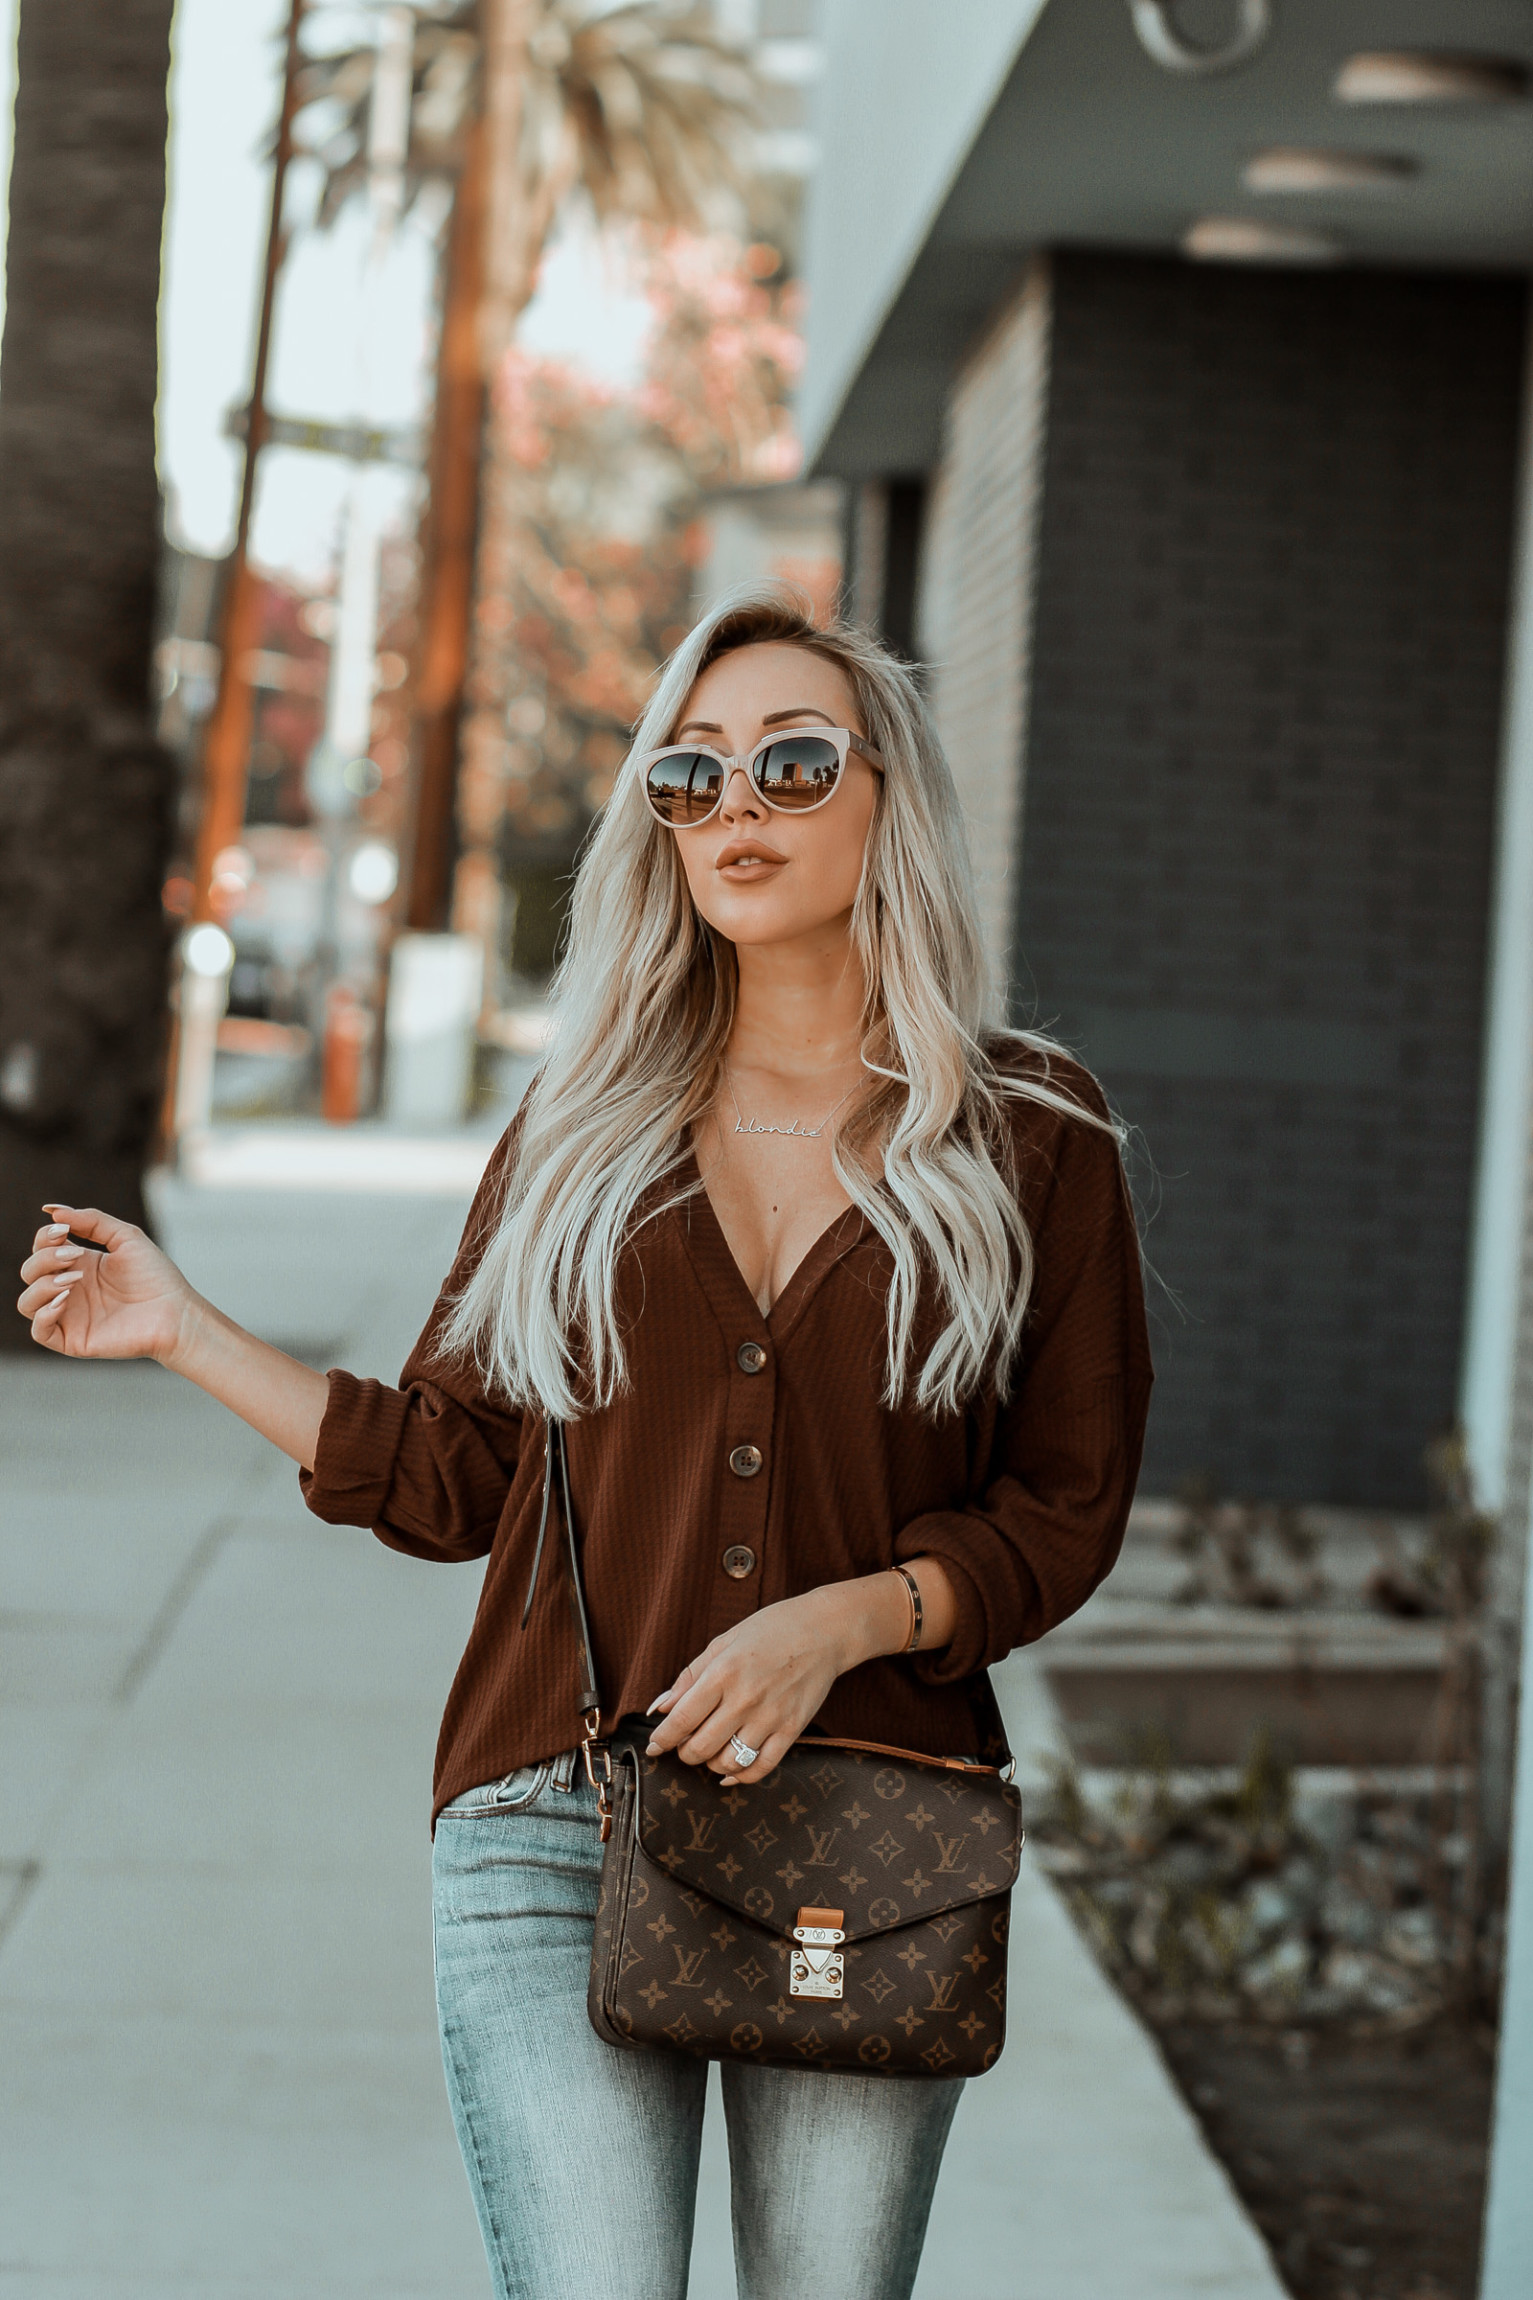 Brown Button Sweater for Fall | Fall Vibes | Distressed Jeans | Louis Vuitton Pochette Metis | Fall Fashion inspo | Blondie in the City by Hayley Larue